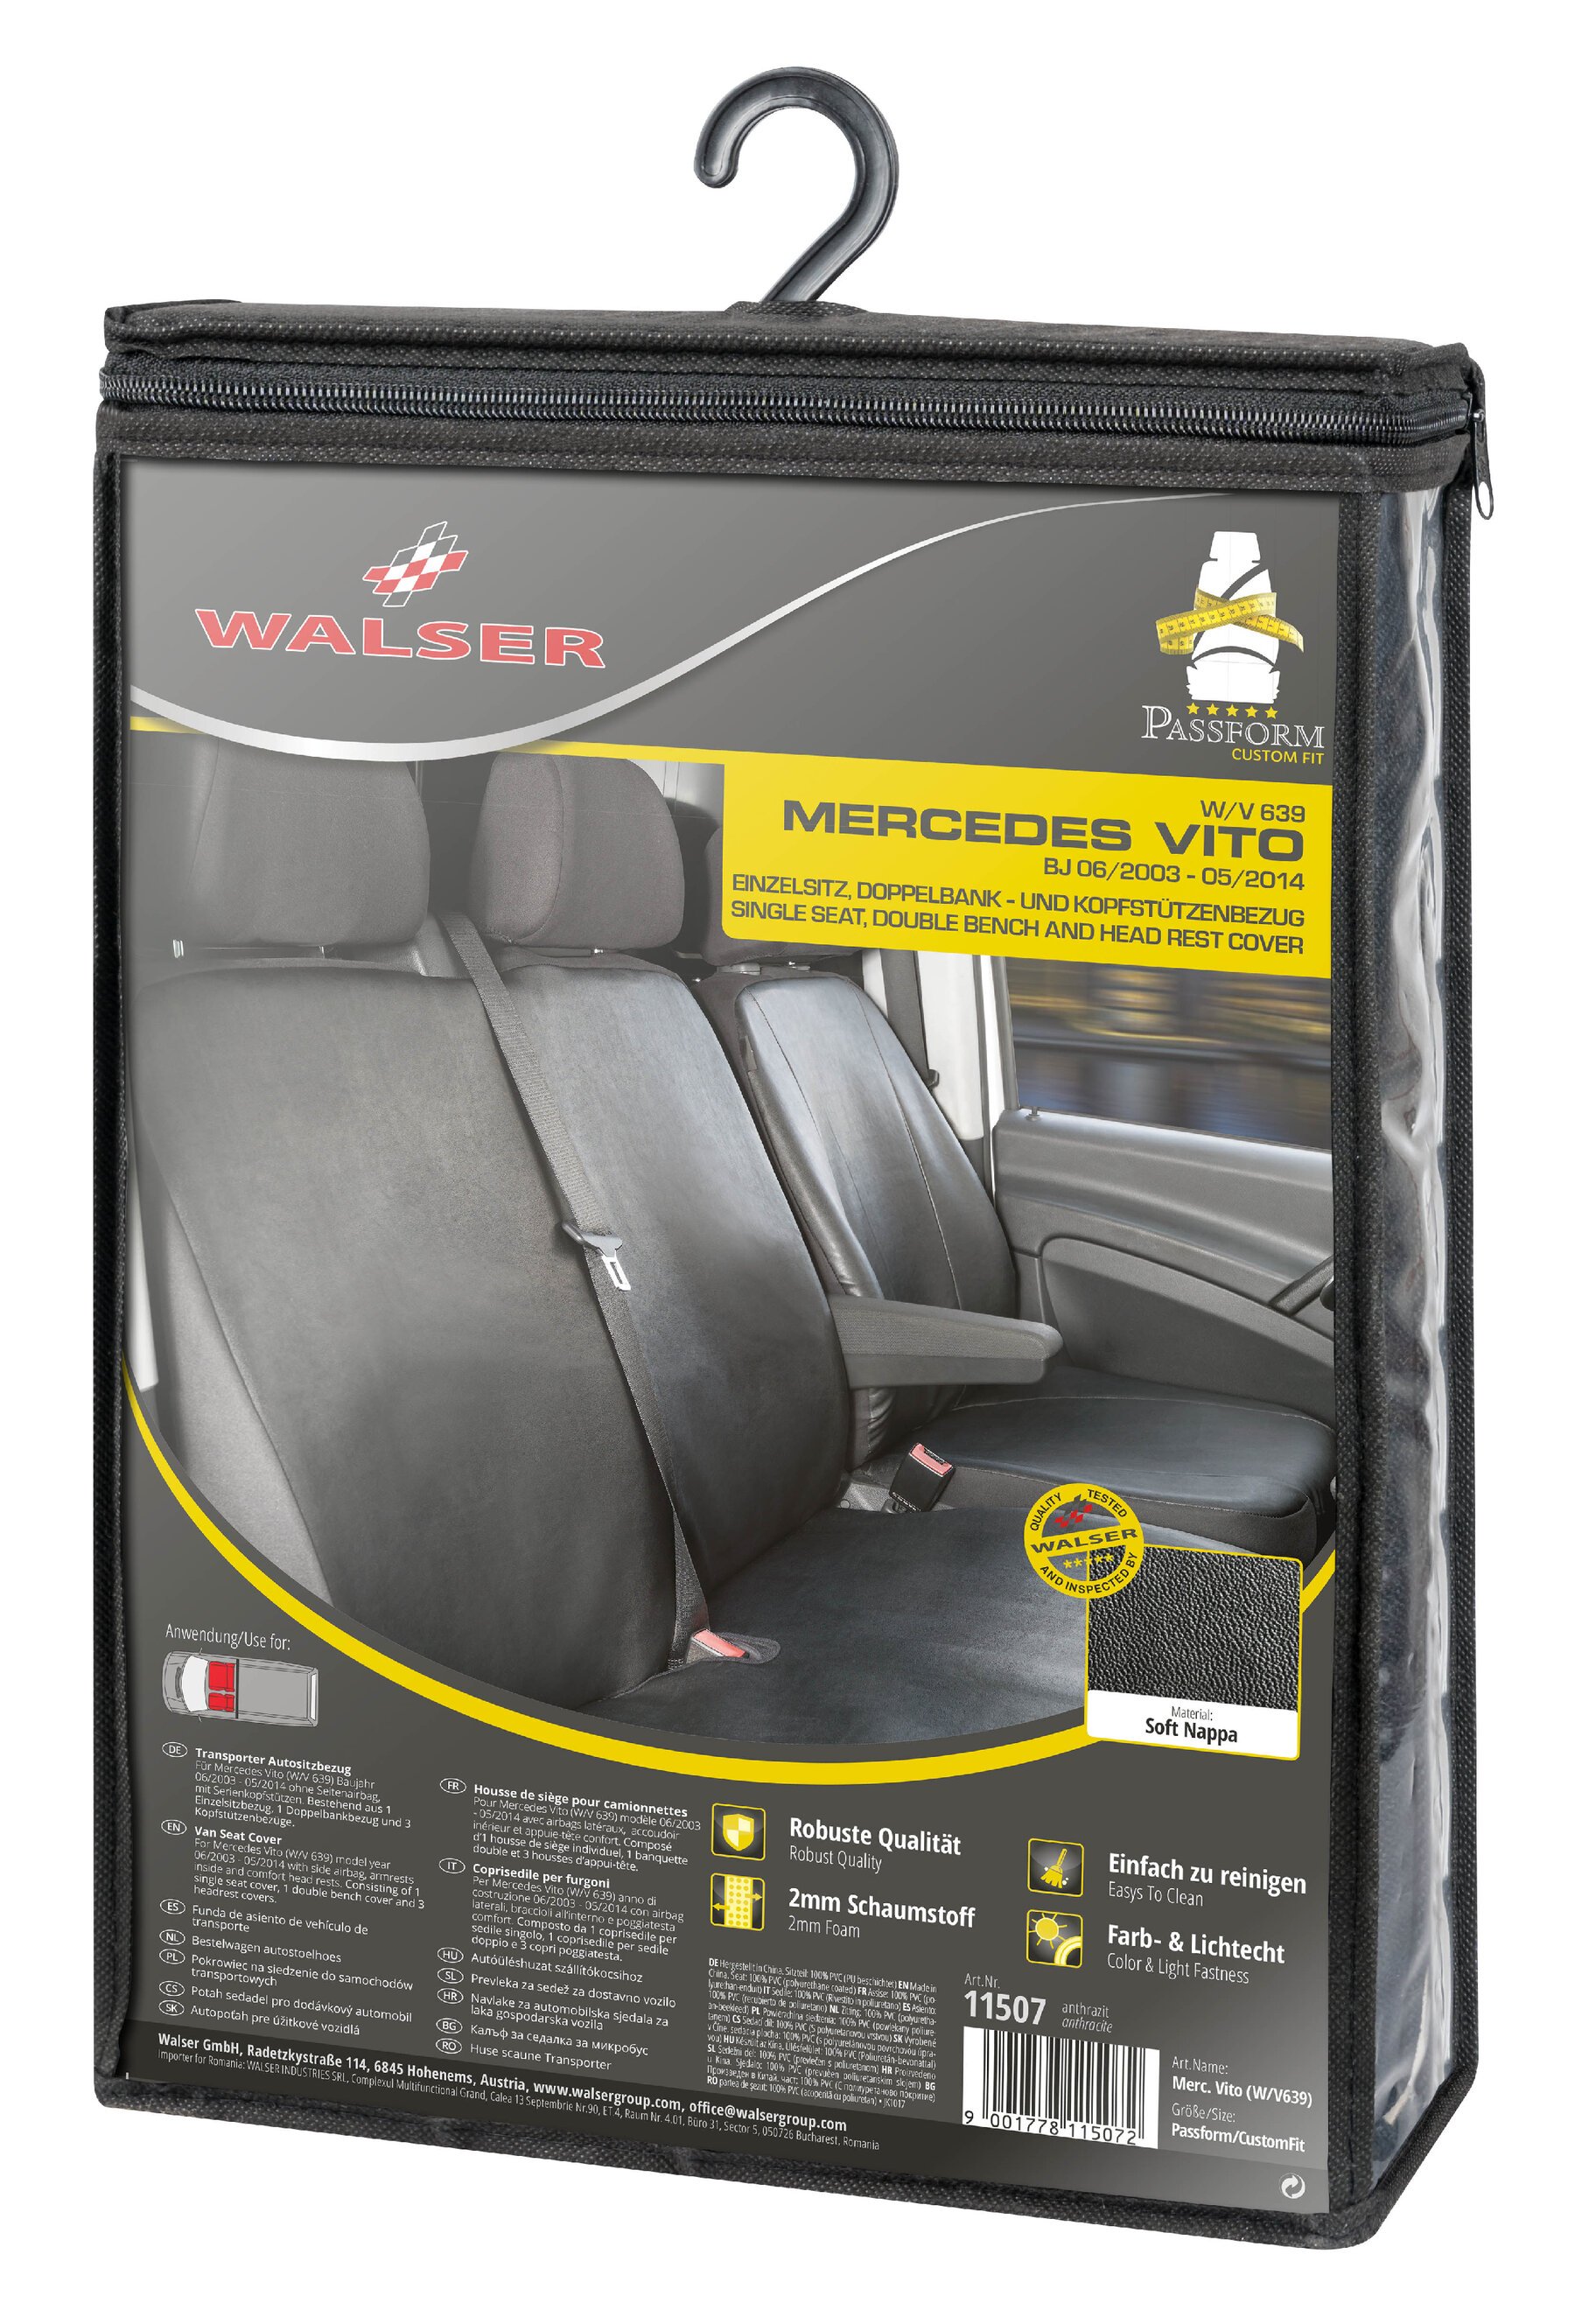 Seat cover made of imitation leather for Mercedes-Benz Viano/Vito, single seat with armrest and double bench